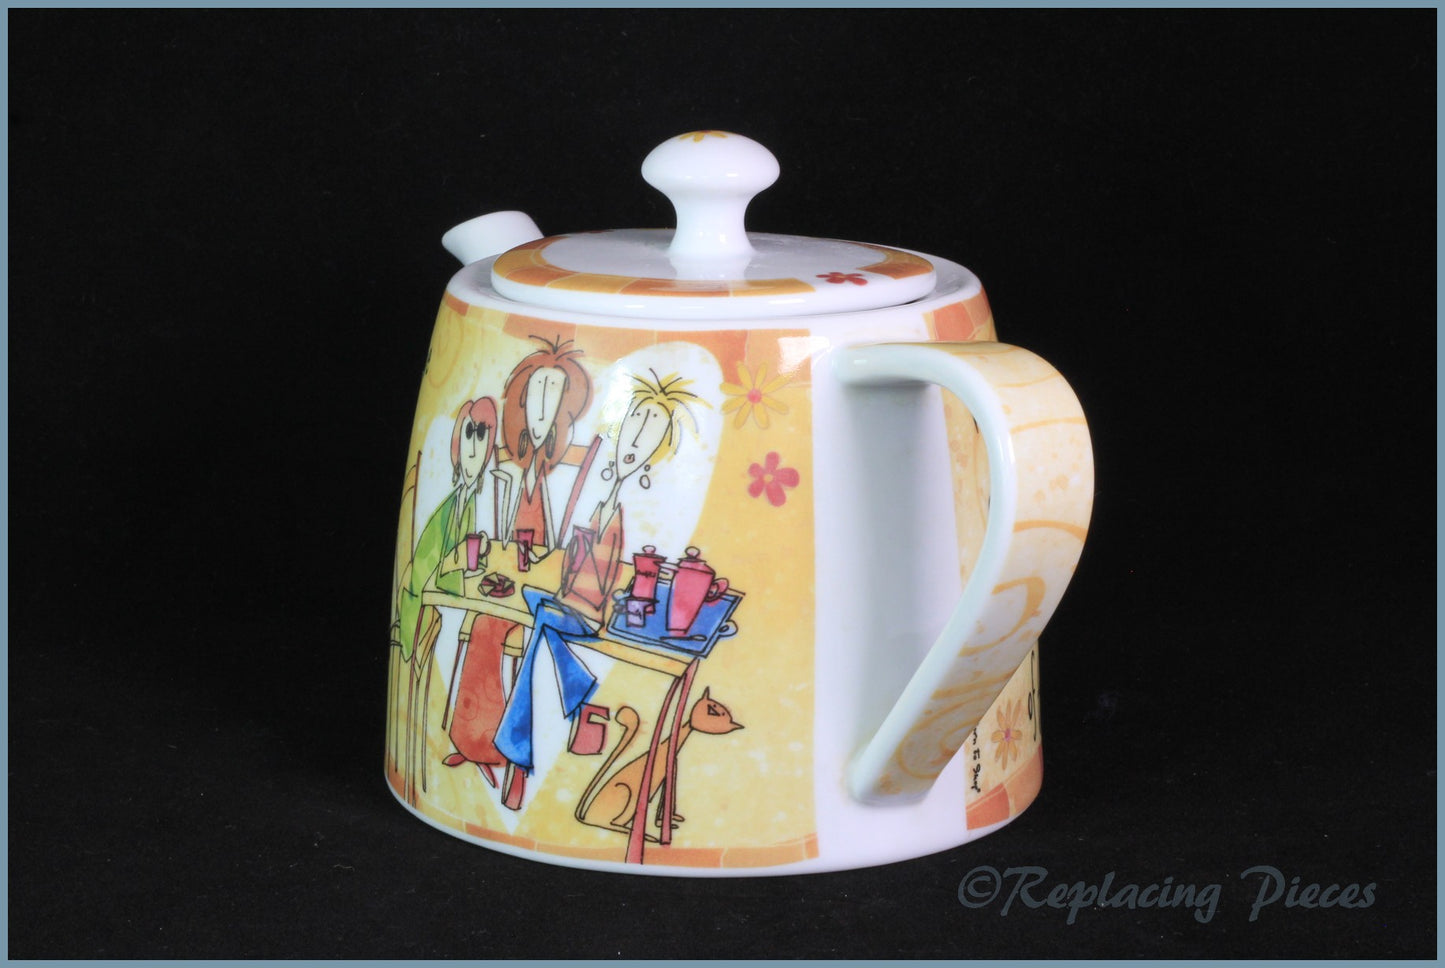 Johnson Brothers - Born To Shop - Teapot (You Can't Have..)